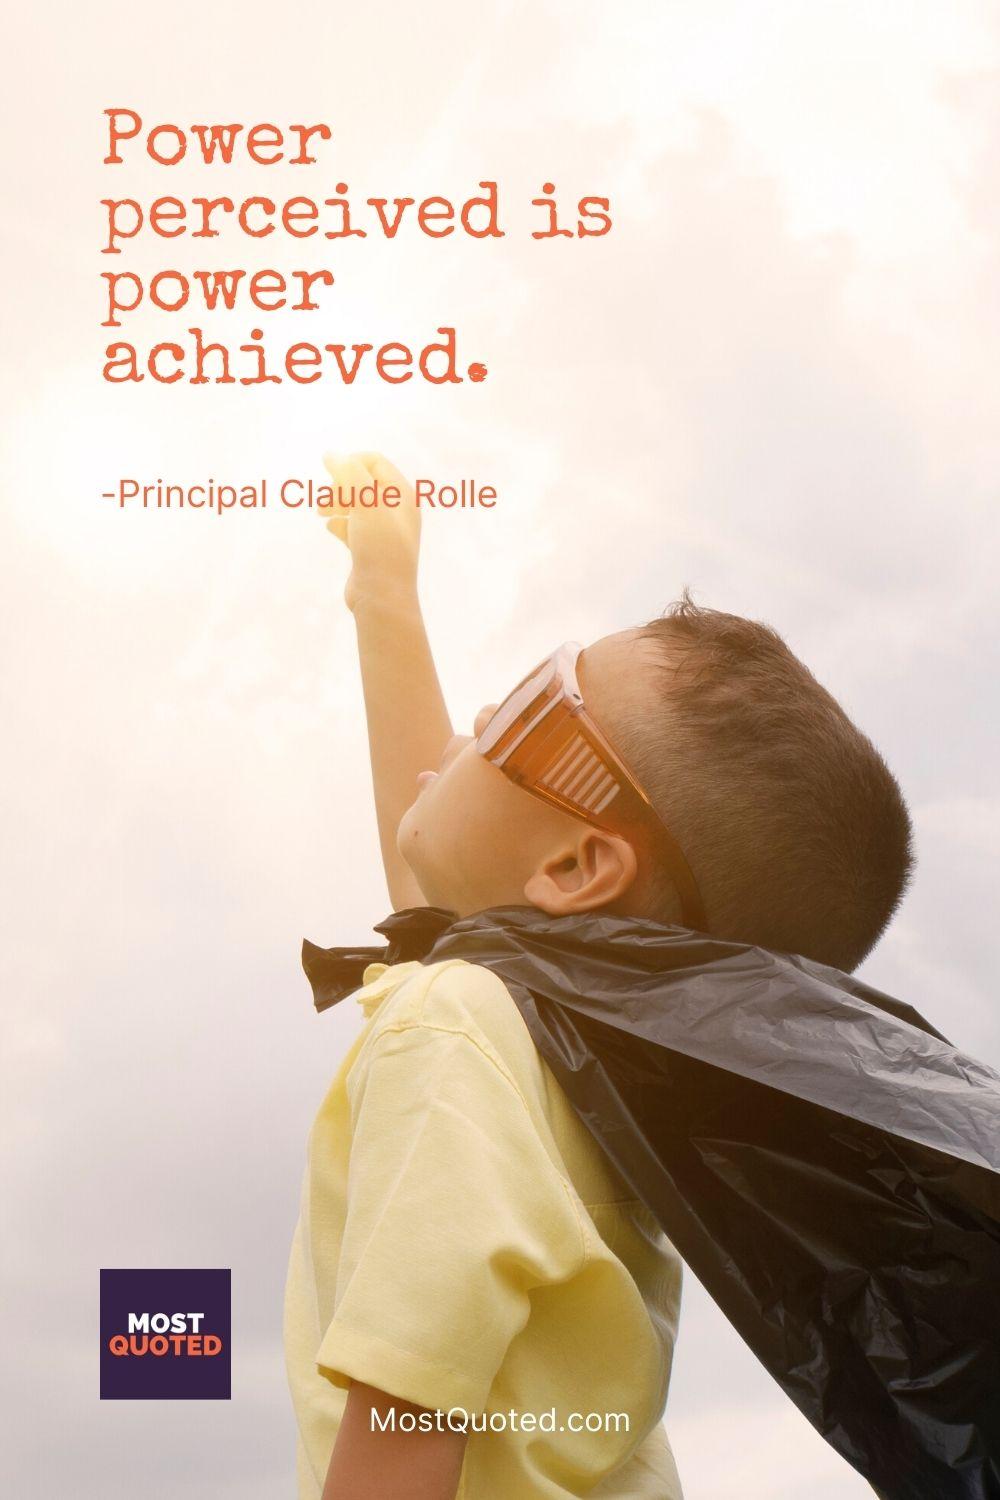 Power perceived is power achieved. - Principal Claude Rolle